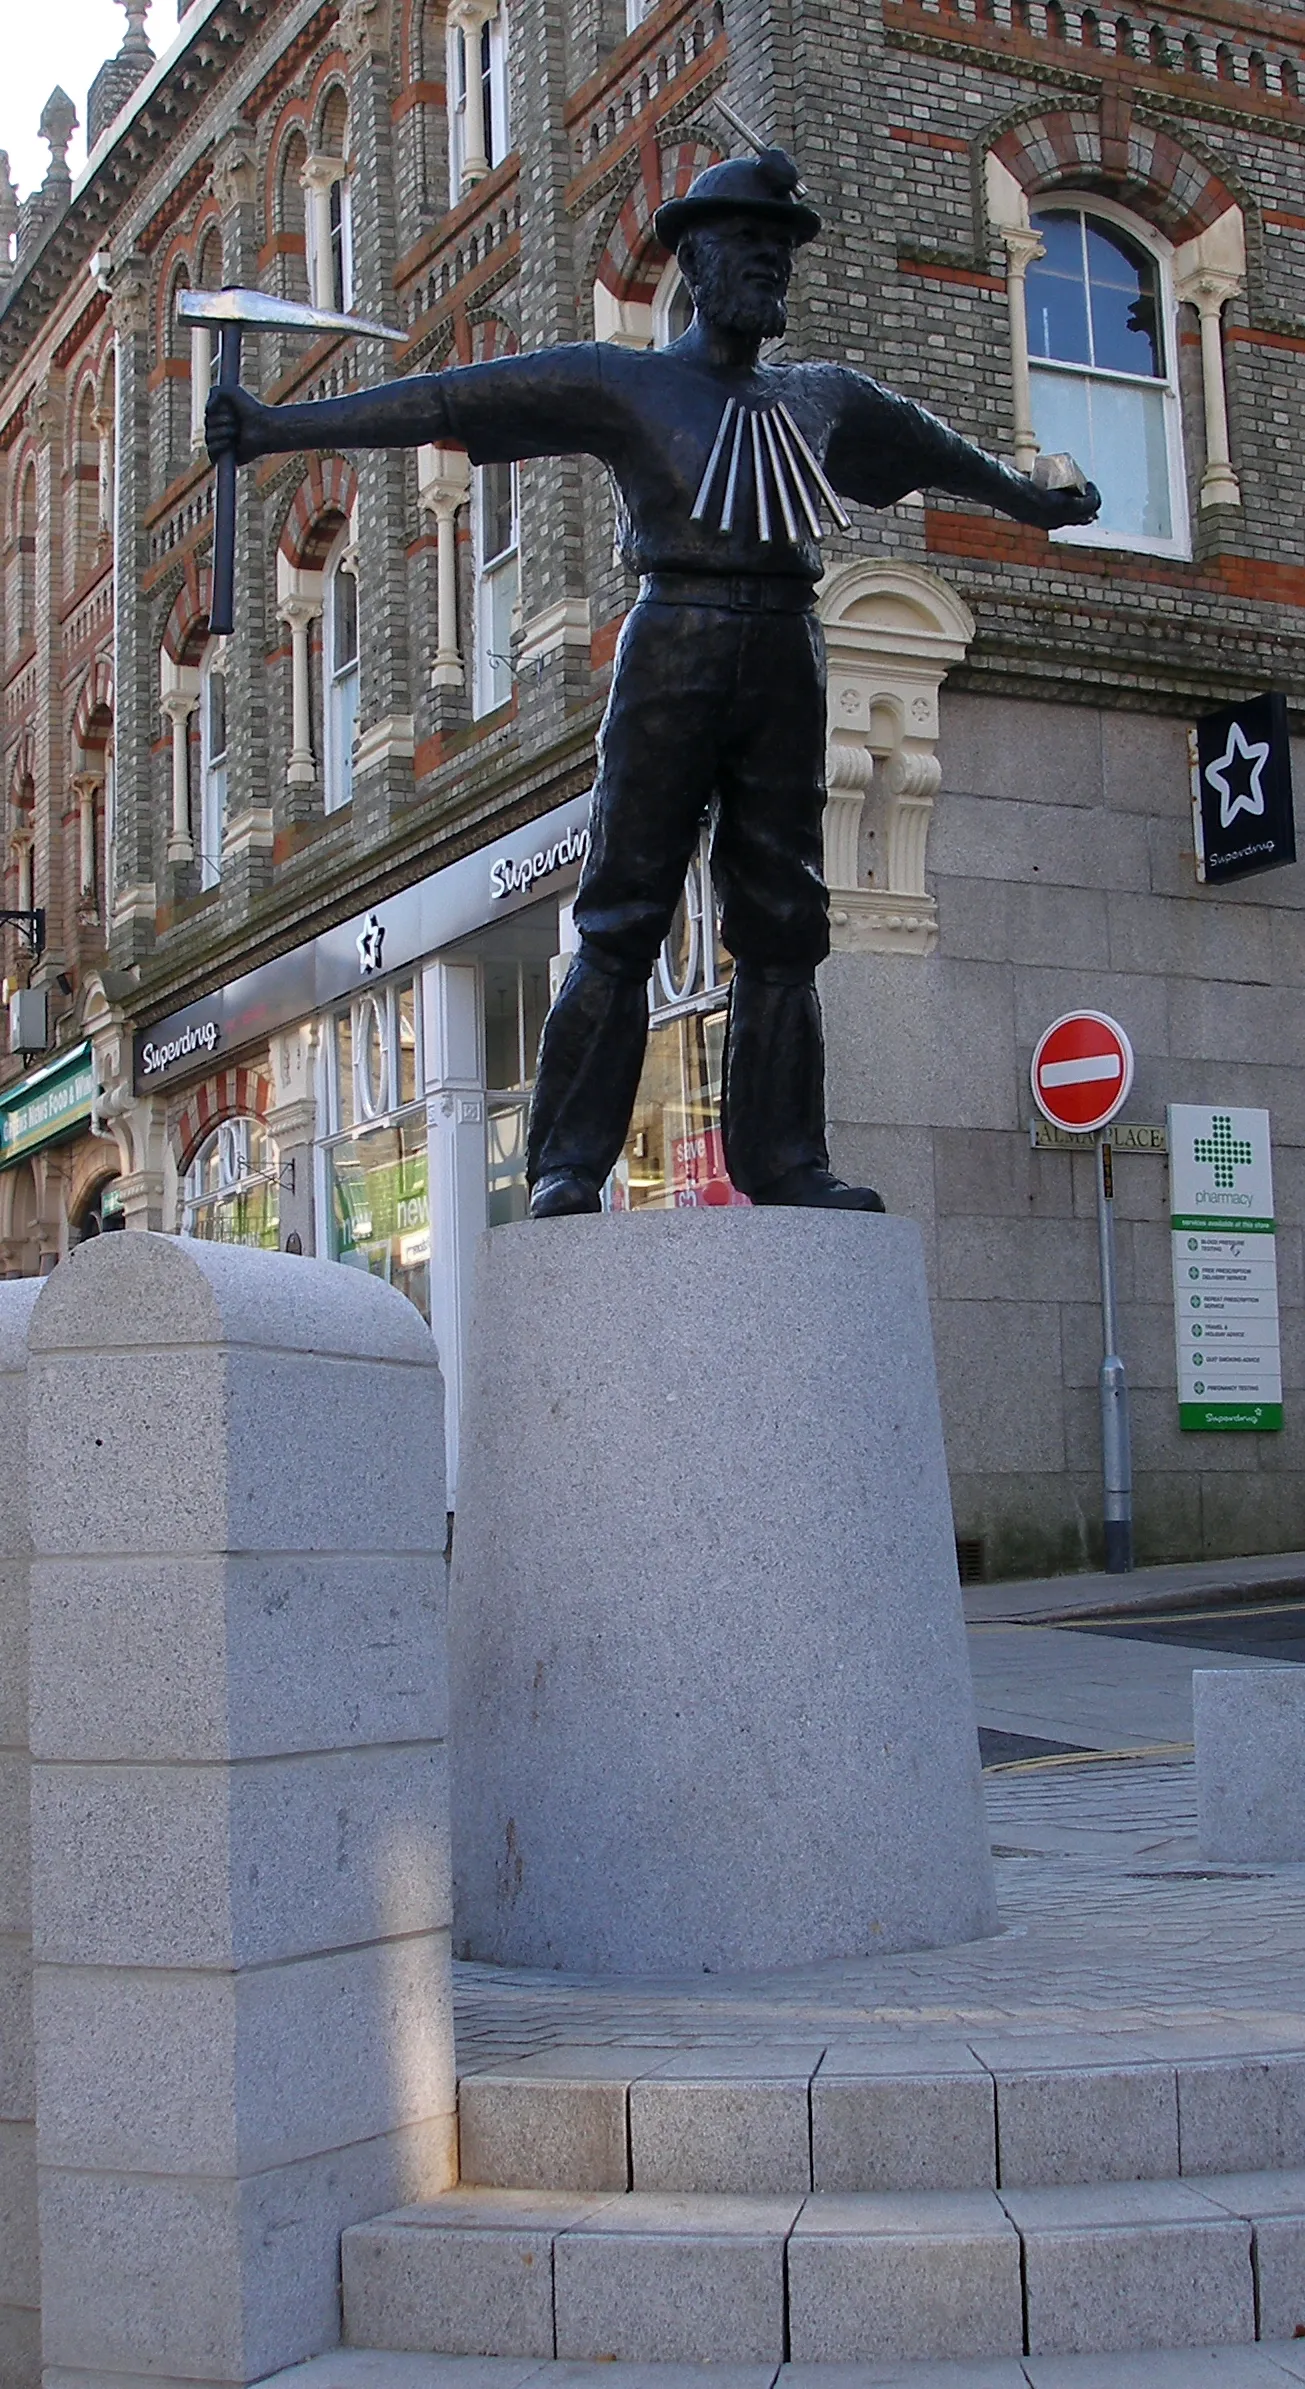 Photo showing: The Tin Miner statue in Redruth, England.